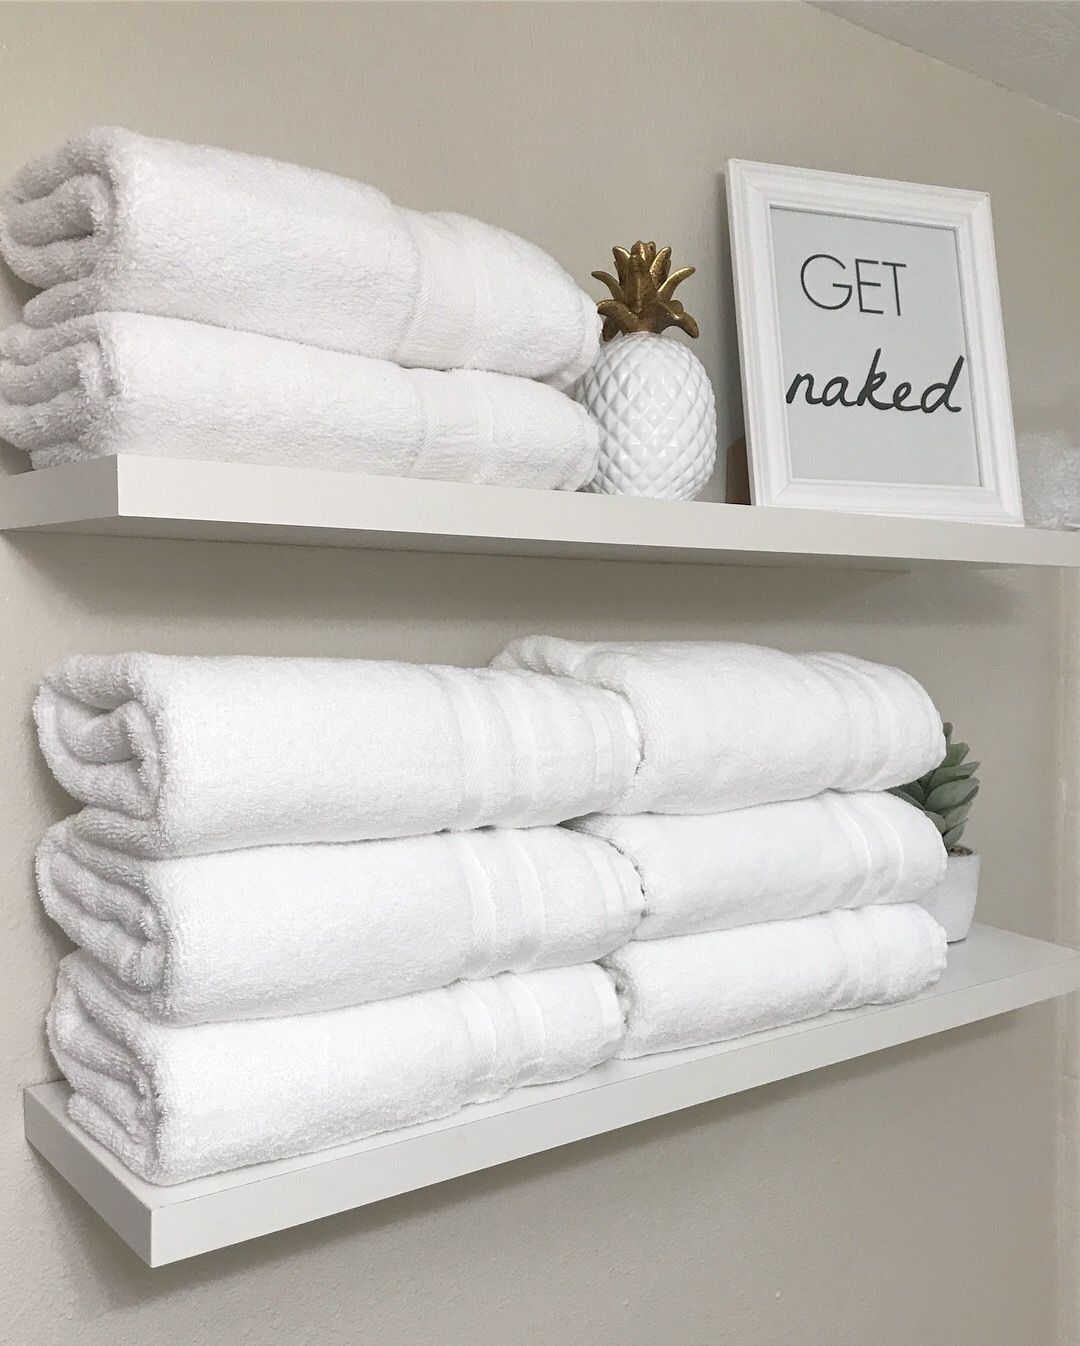 white bathroom floating shelves towel storage towels small canvas luggage paint ture frames ikea farm sink what fireplace mantel wall mounted coat rack with bench bunnings corner